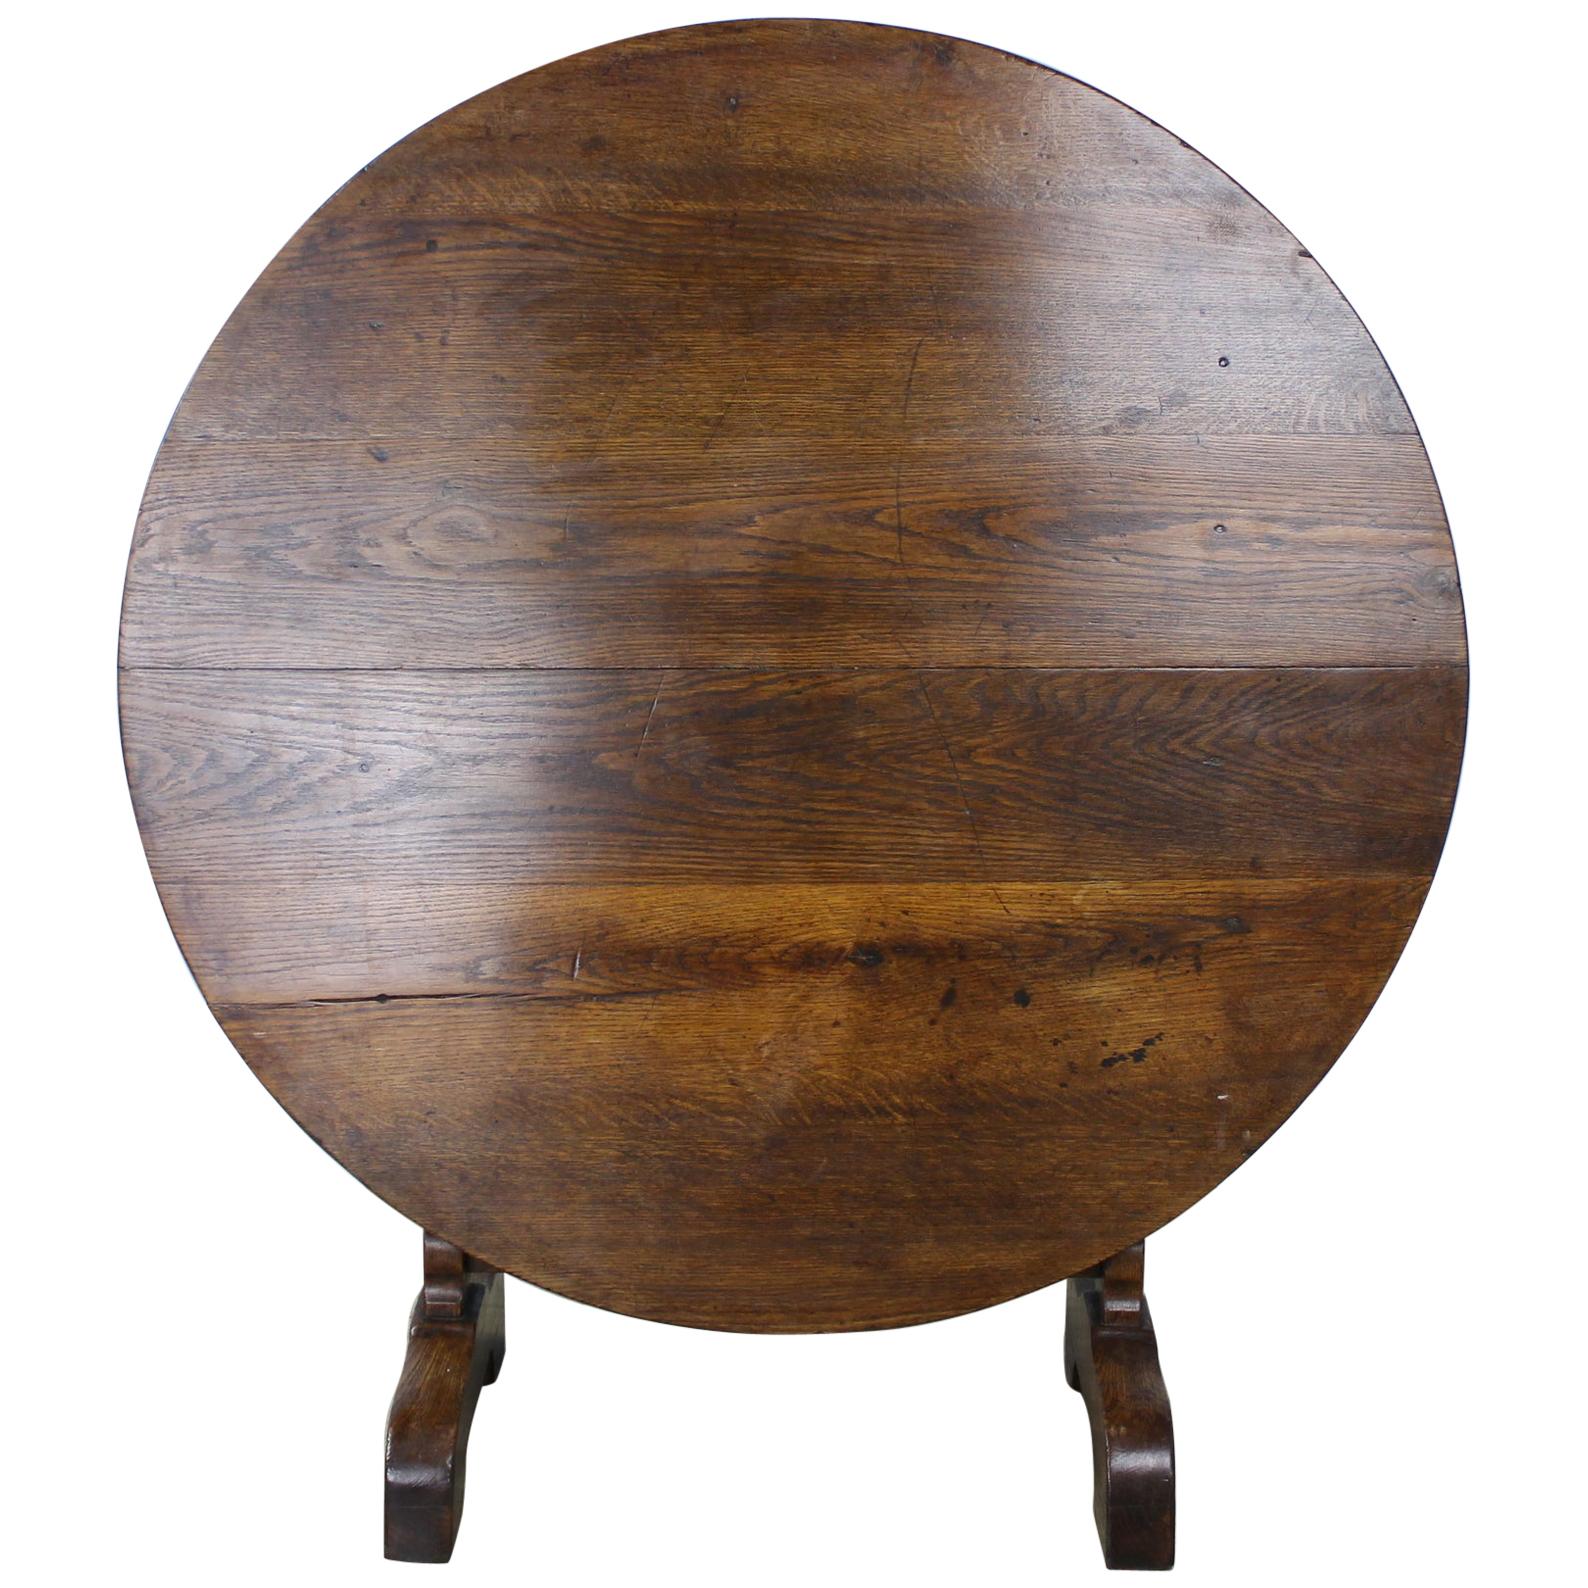 The oak graining on this very good vendange wine tasting table is quite wonderful. The thick top has a nice patinated edge. The swivel gateleg table base is easy to use and is sturdy, with a small mechanism to keep it from swinging open. The table